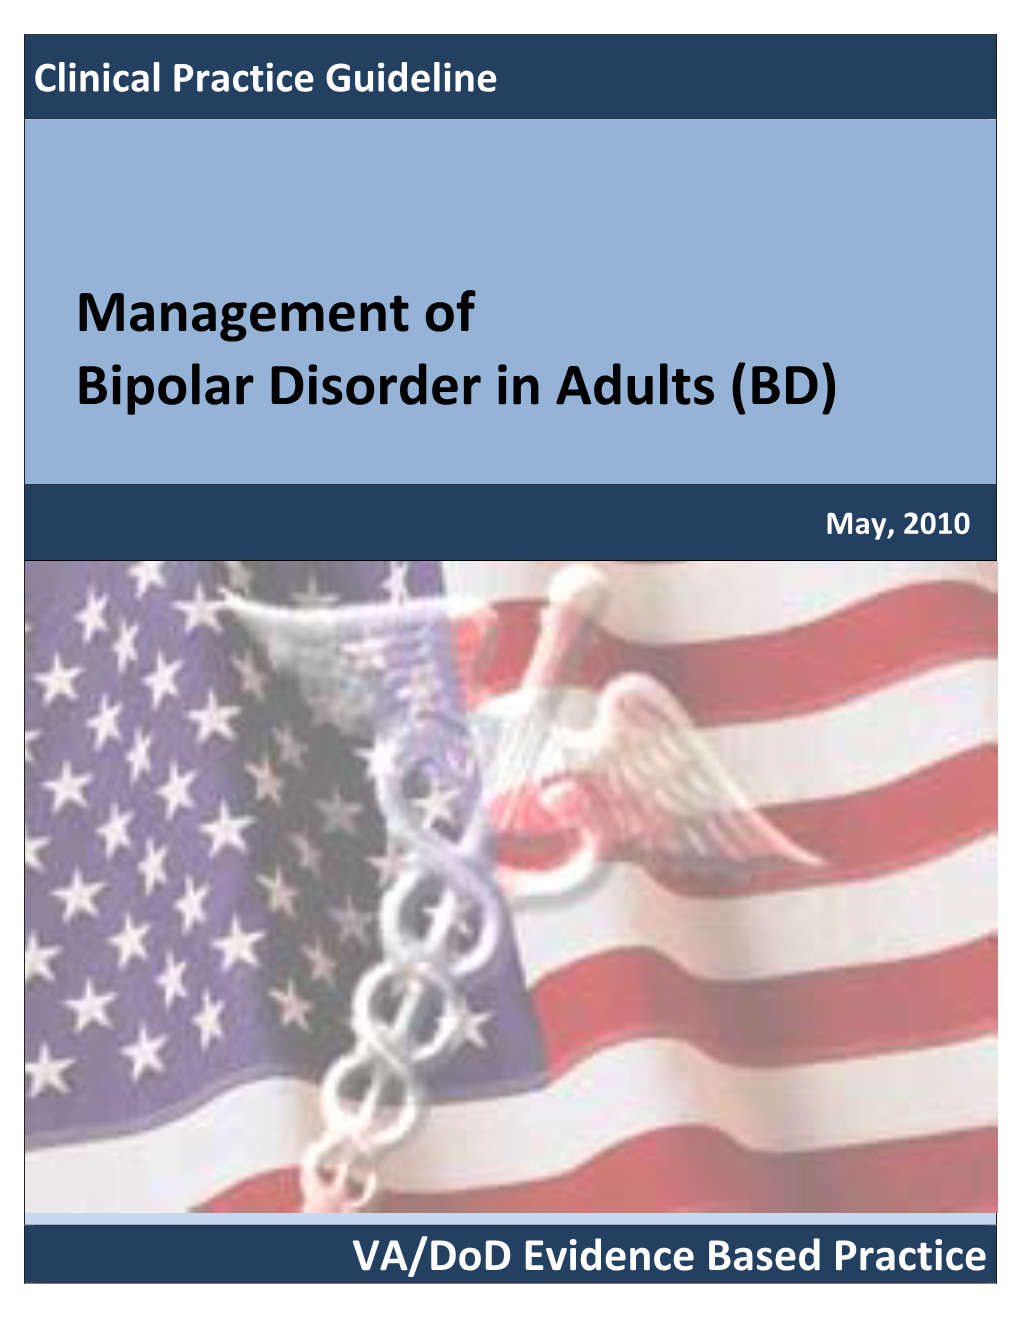 VA/Dod CLINICAL PRACTICE GUIDELINE for MANAGEMENT of BIPOLAR DISORDER in ADULTS